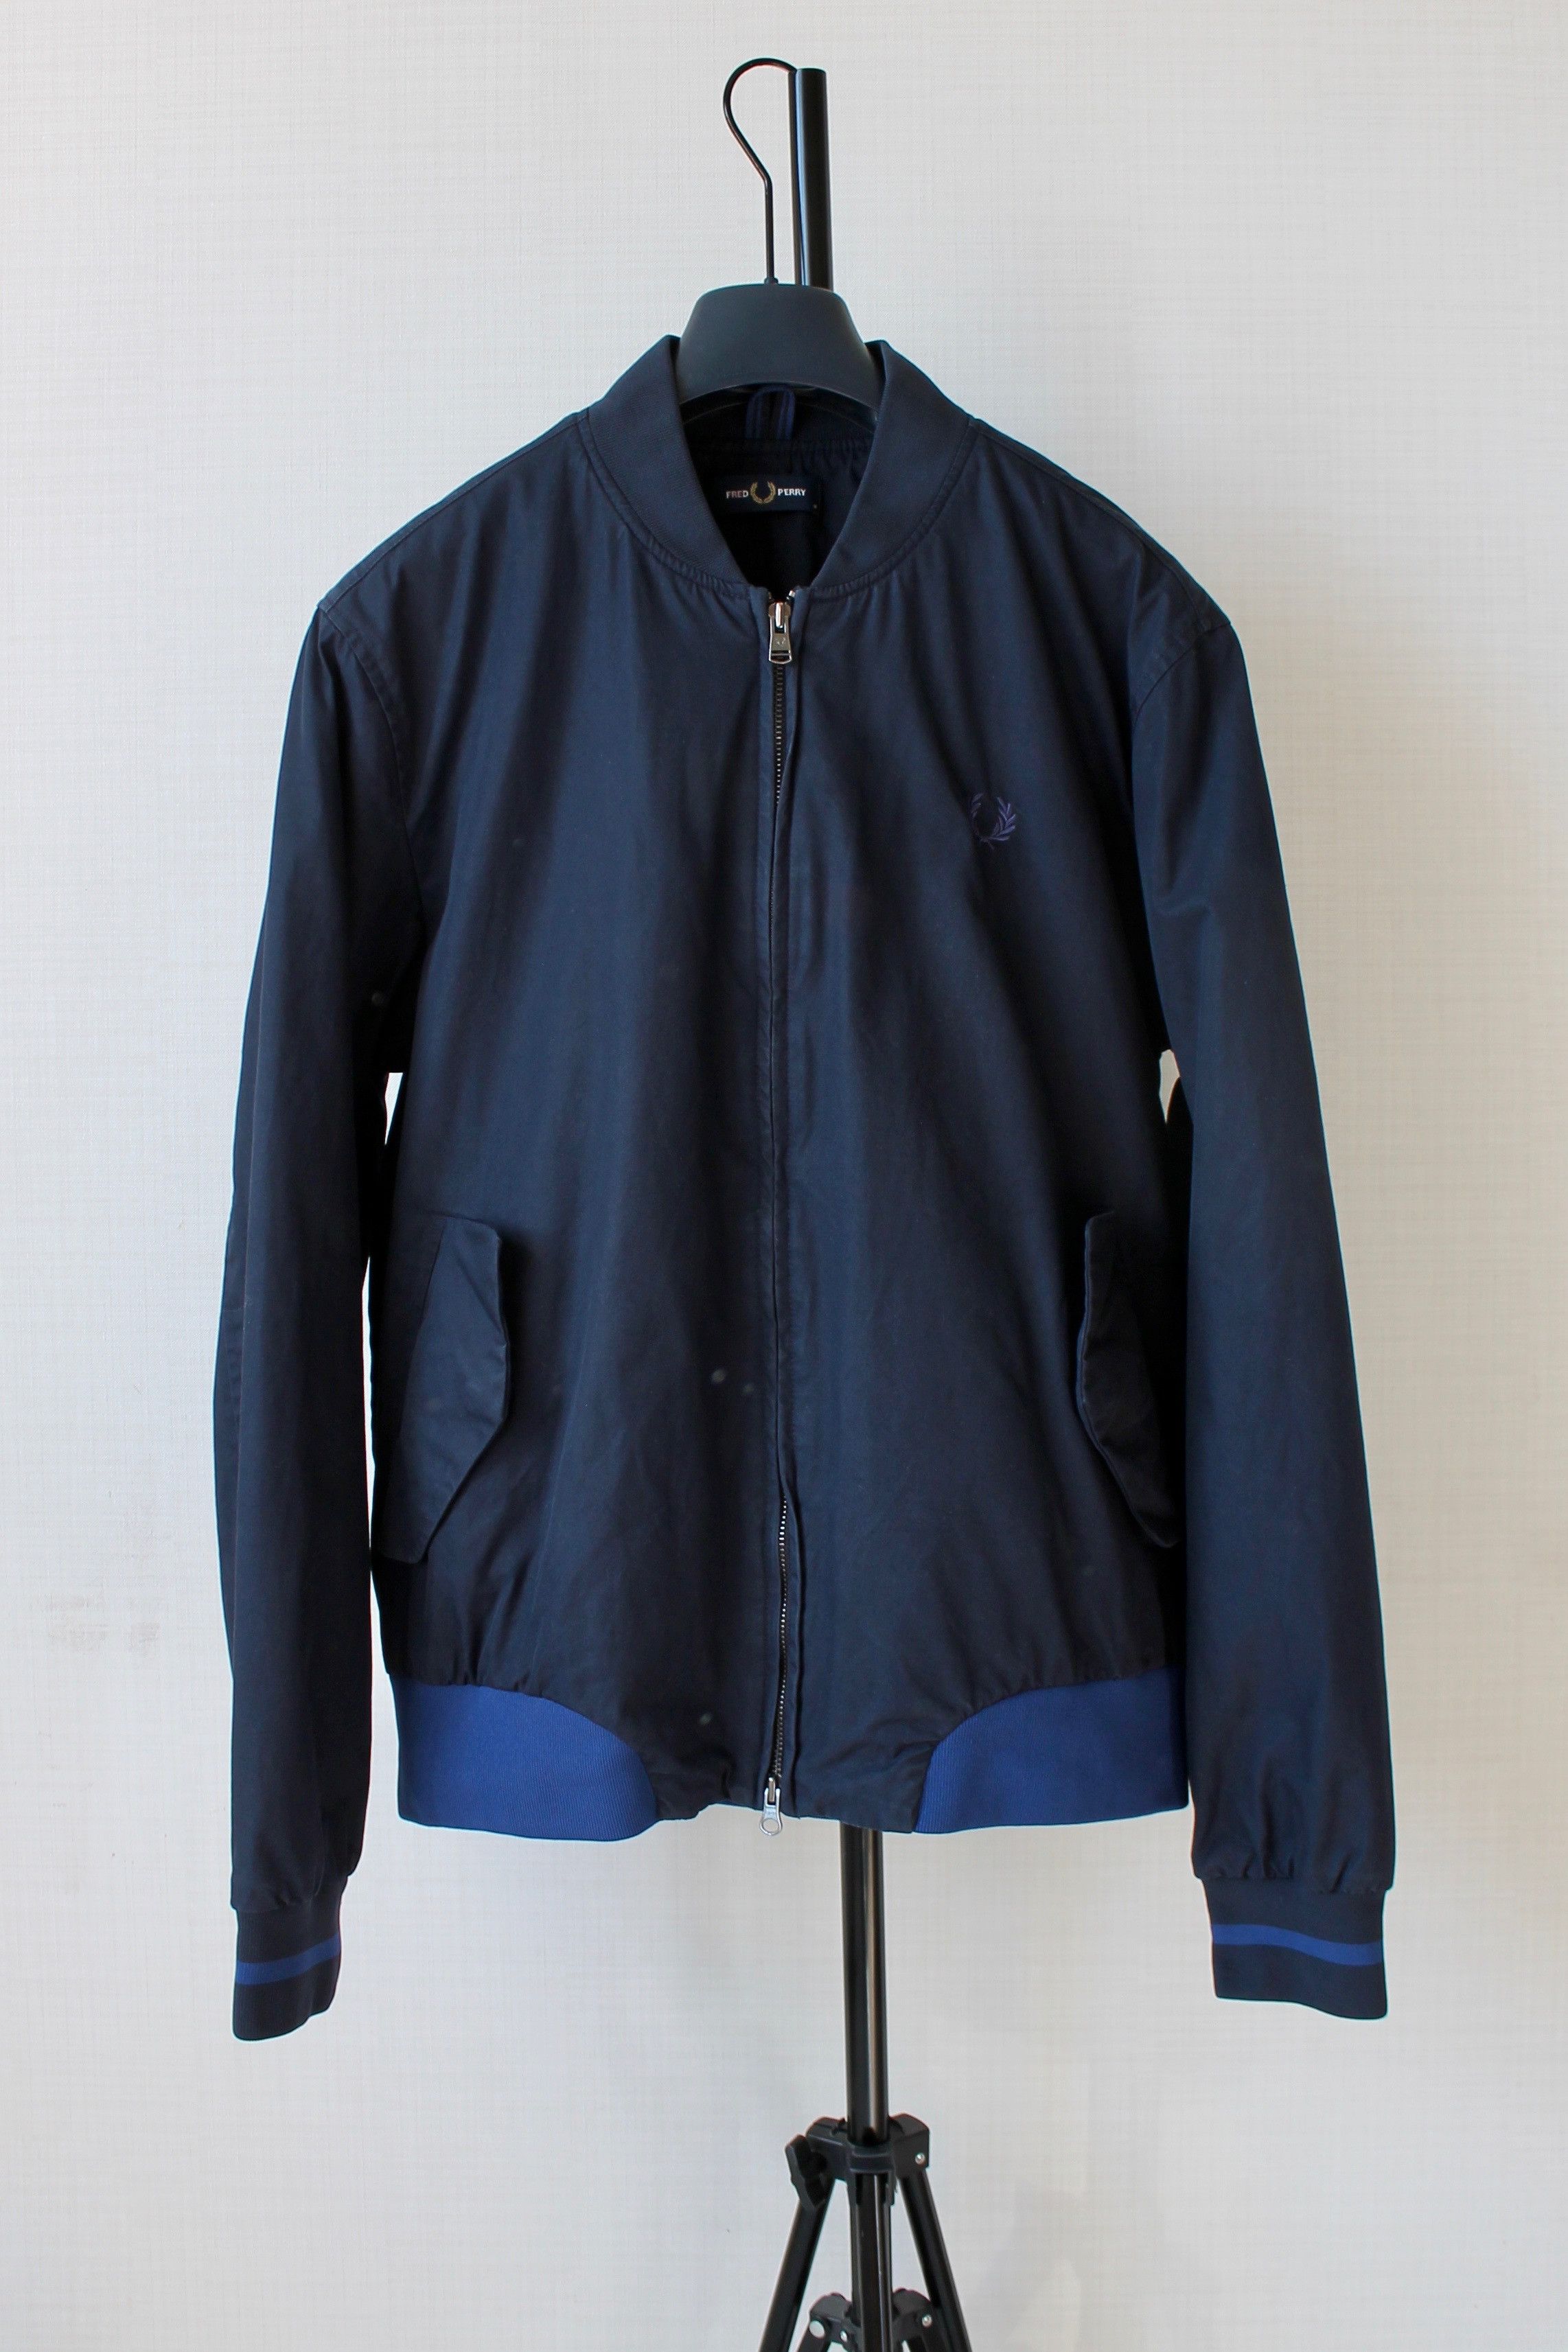 Fred Perry Fred Perry Bomber J7521/608 Varsity Light Jacket | Grailed